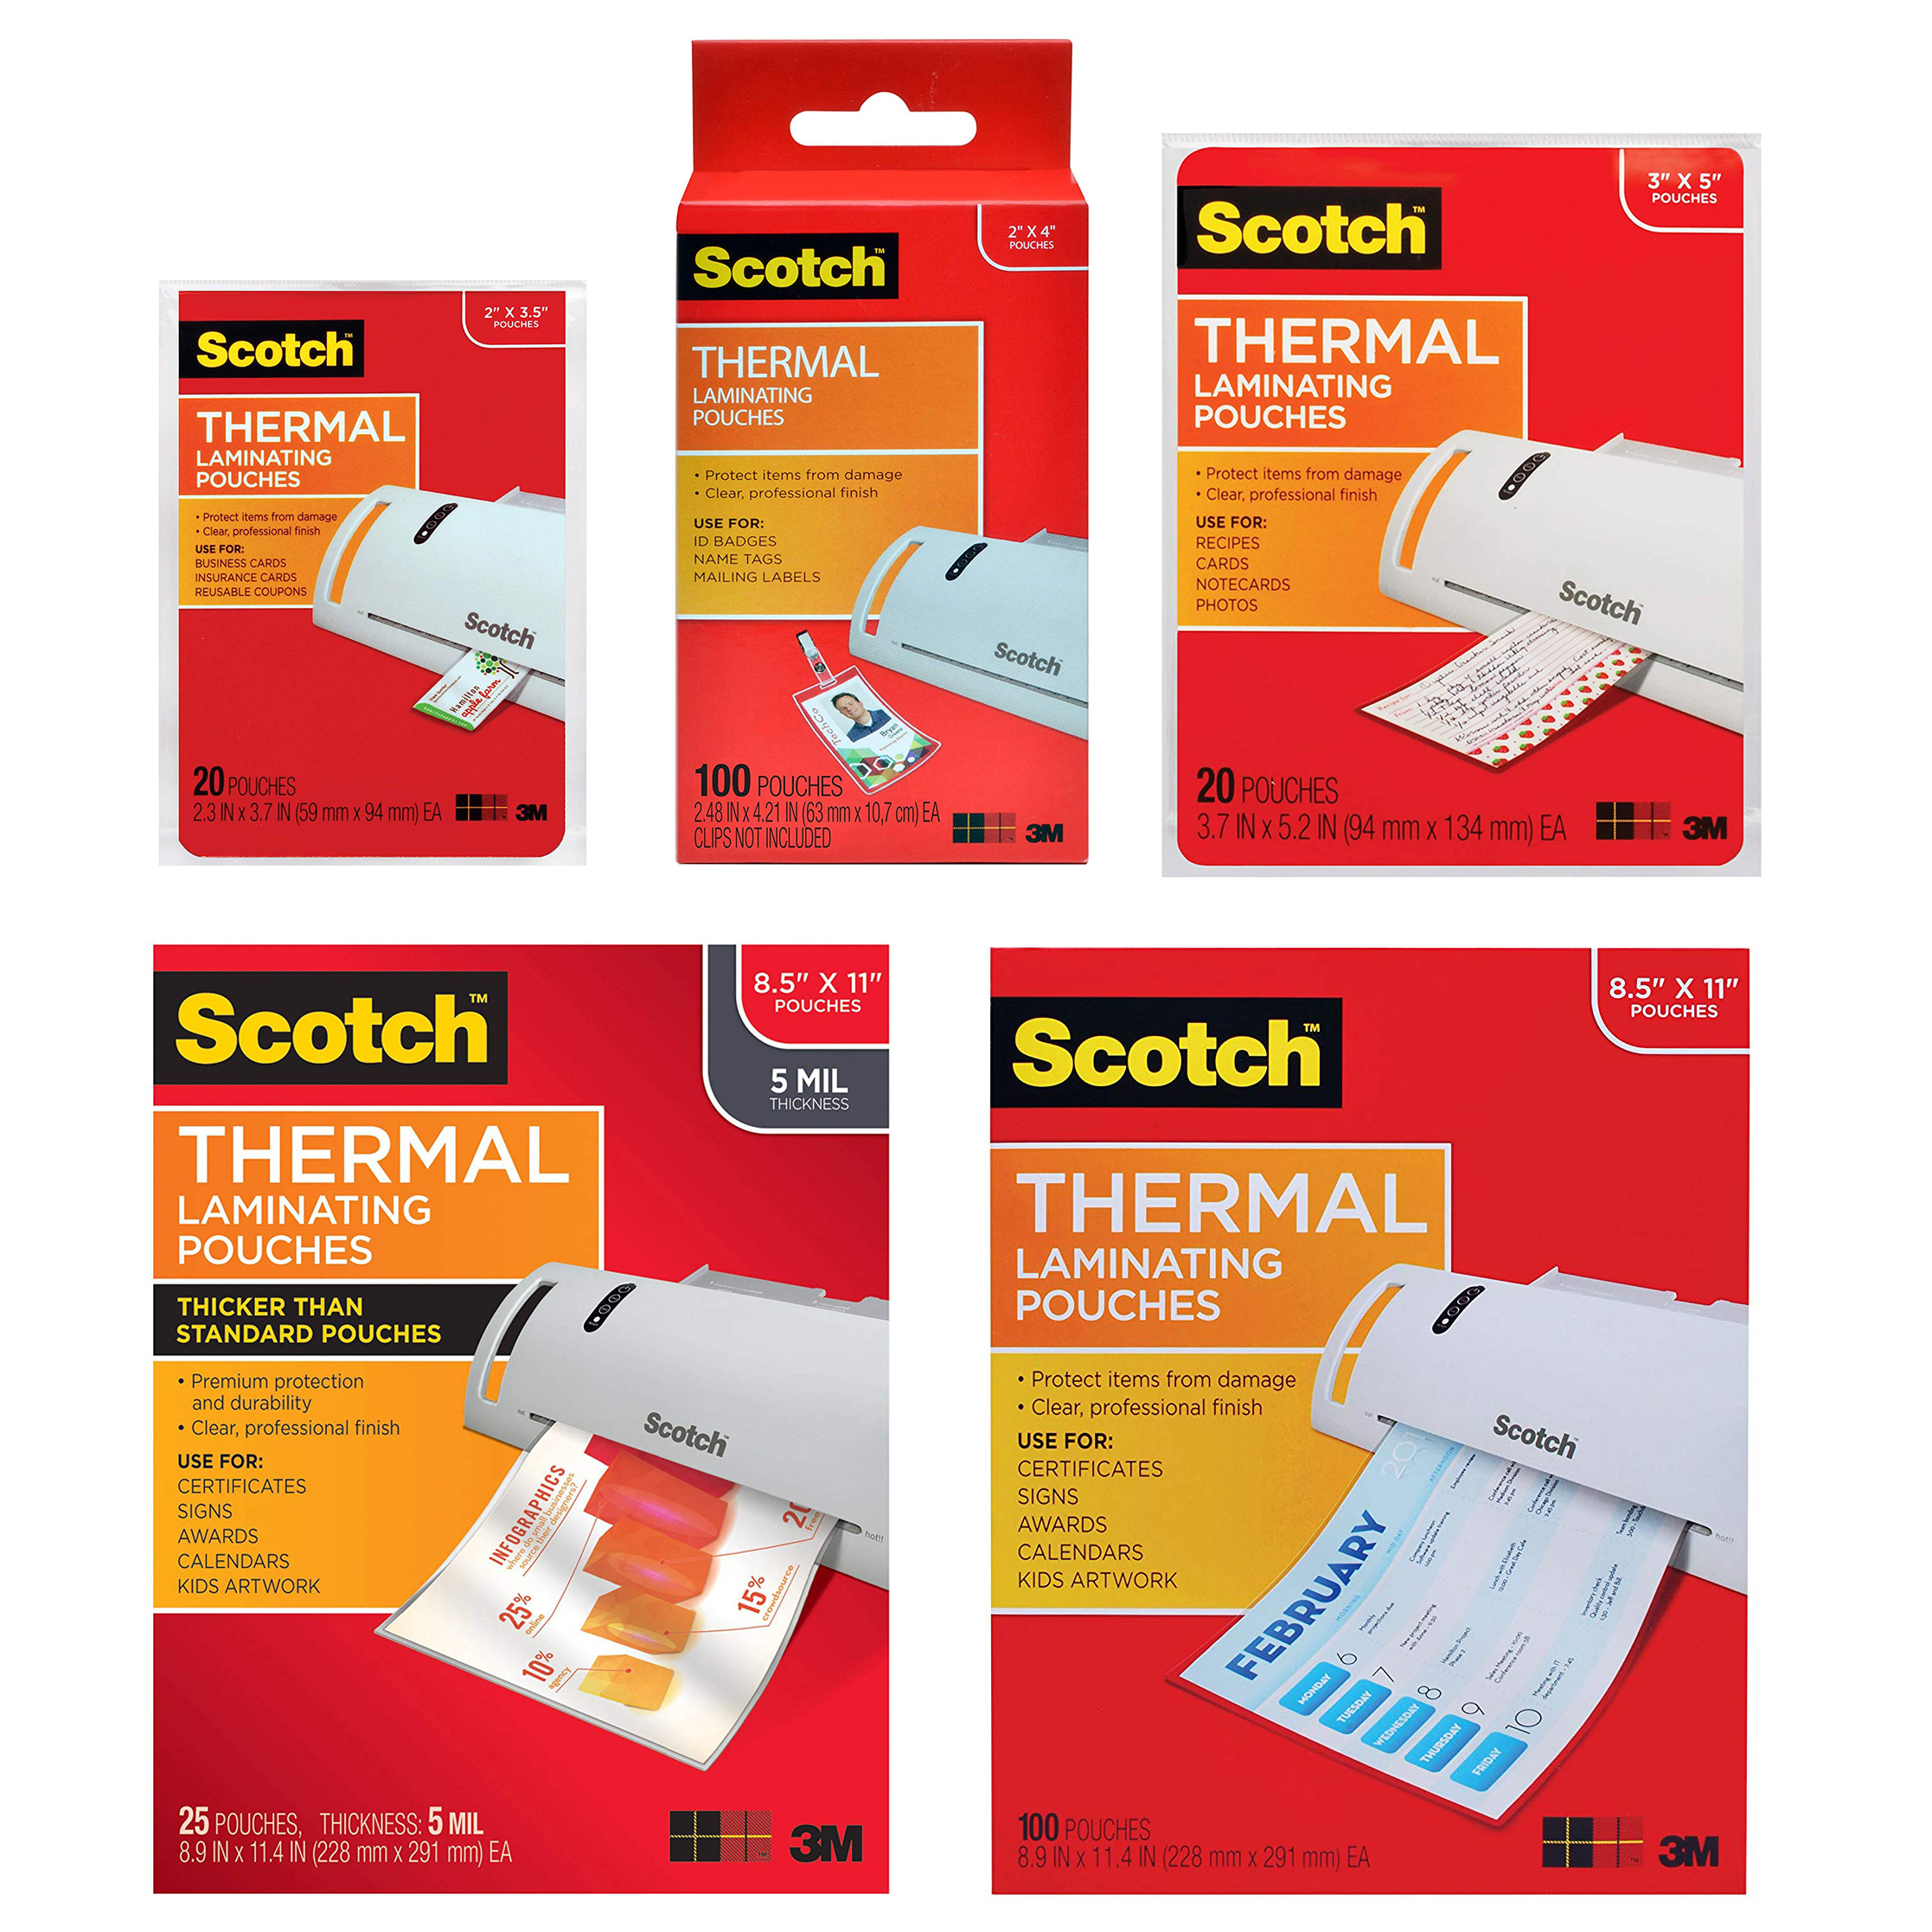 - 2 Pack ID Badge Without Clip 100-Pouches TP5852-100 2.4 x 4.2-Inches Scotch Thermal Laminating Pouches